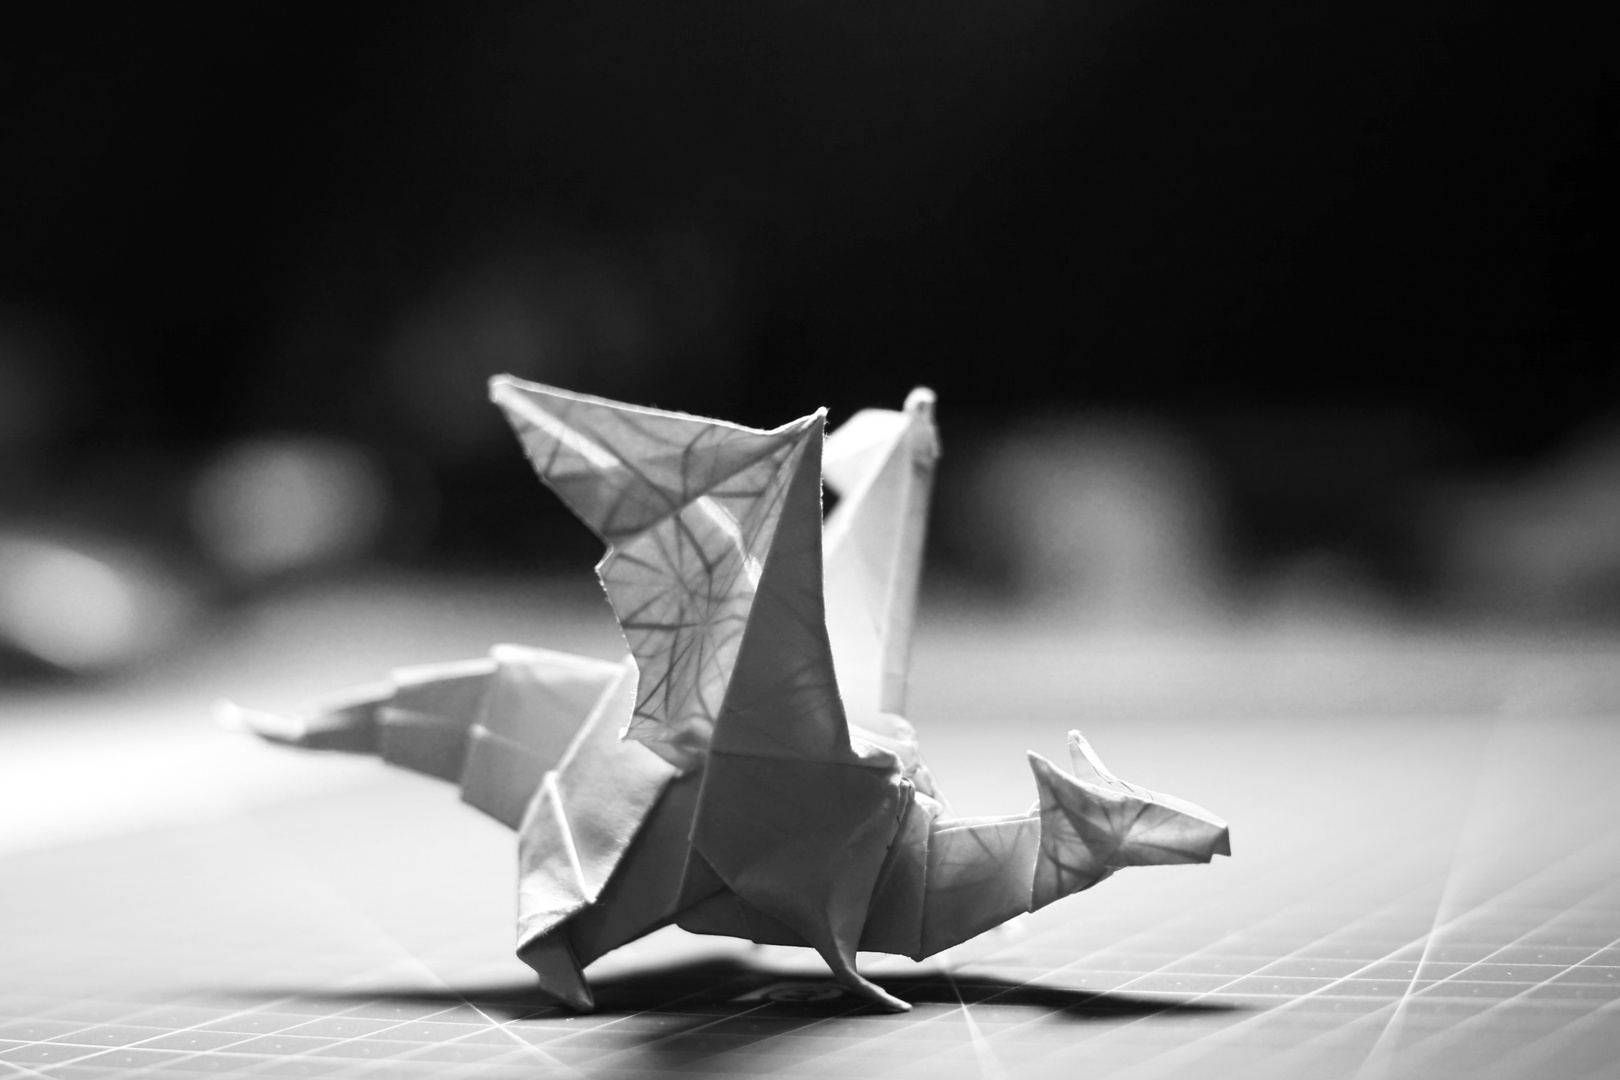 A song of origami and fire